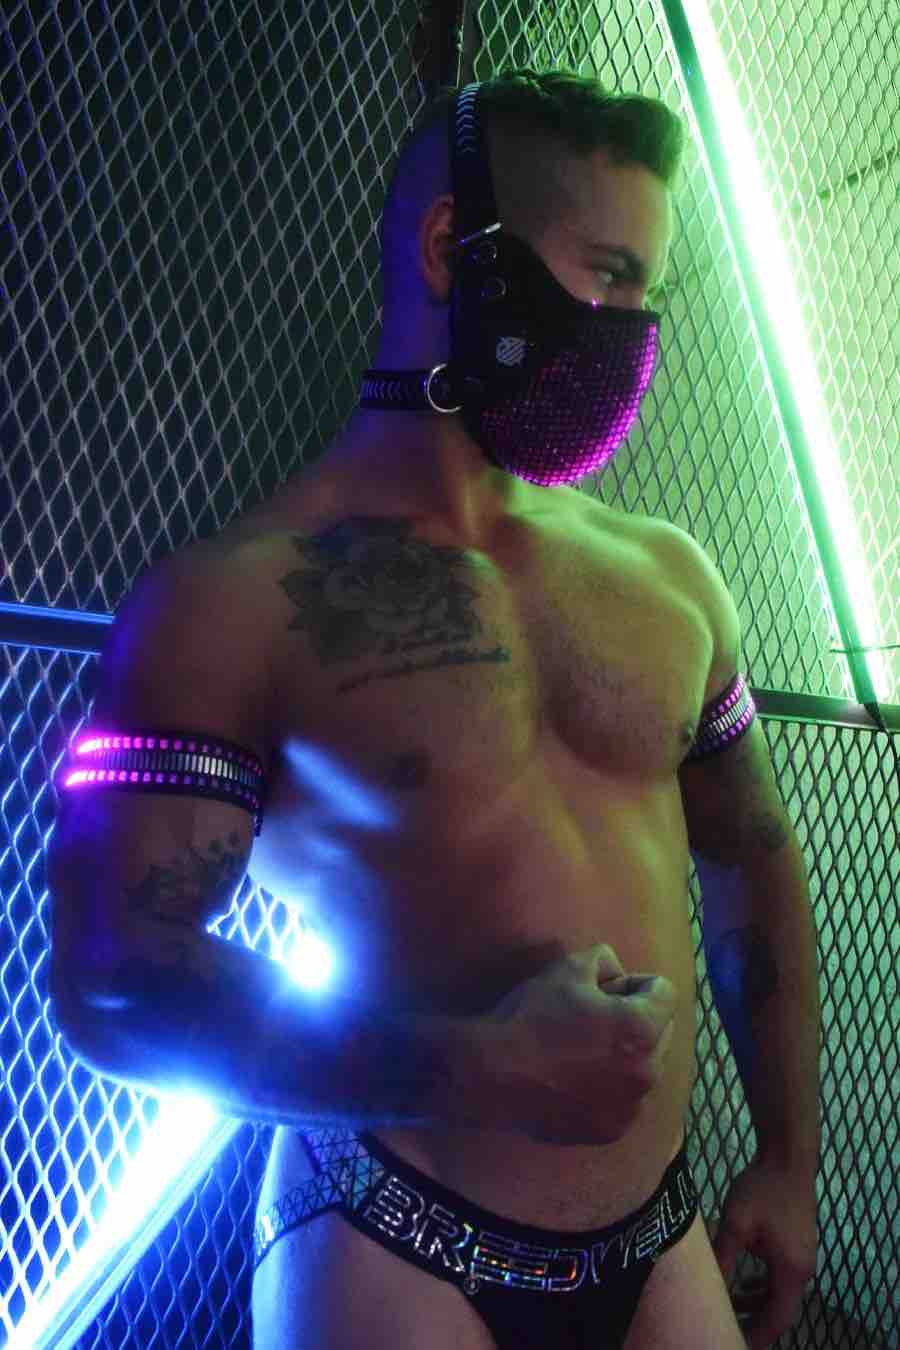 A model wearing the Mirror Light Armbands on both arms with pink lights showing.